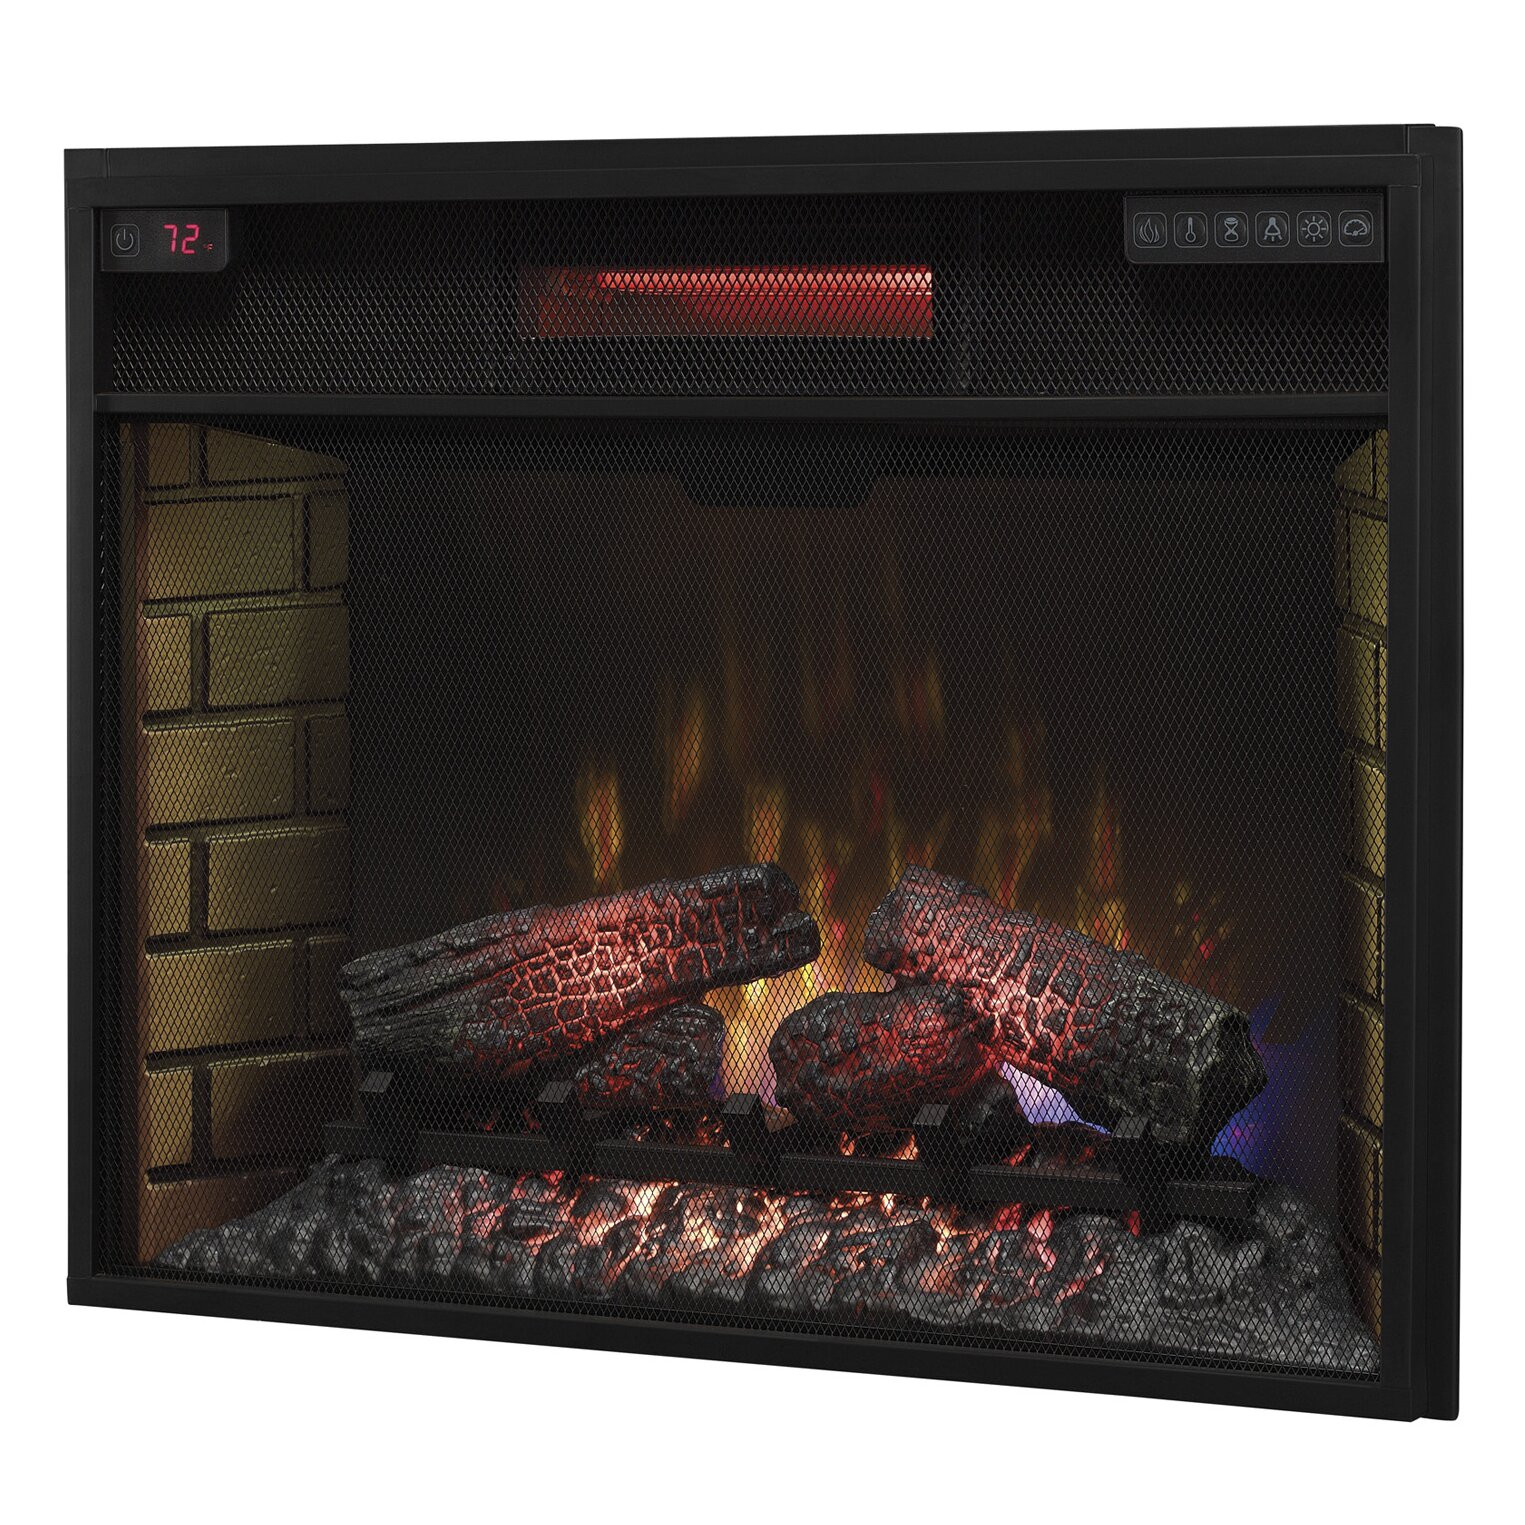 Classicflame Electric Fireplace Insert
 Classic Flame Infrared Electric Fireplace Insert & Reviews